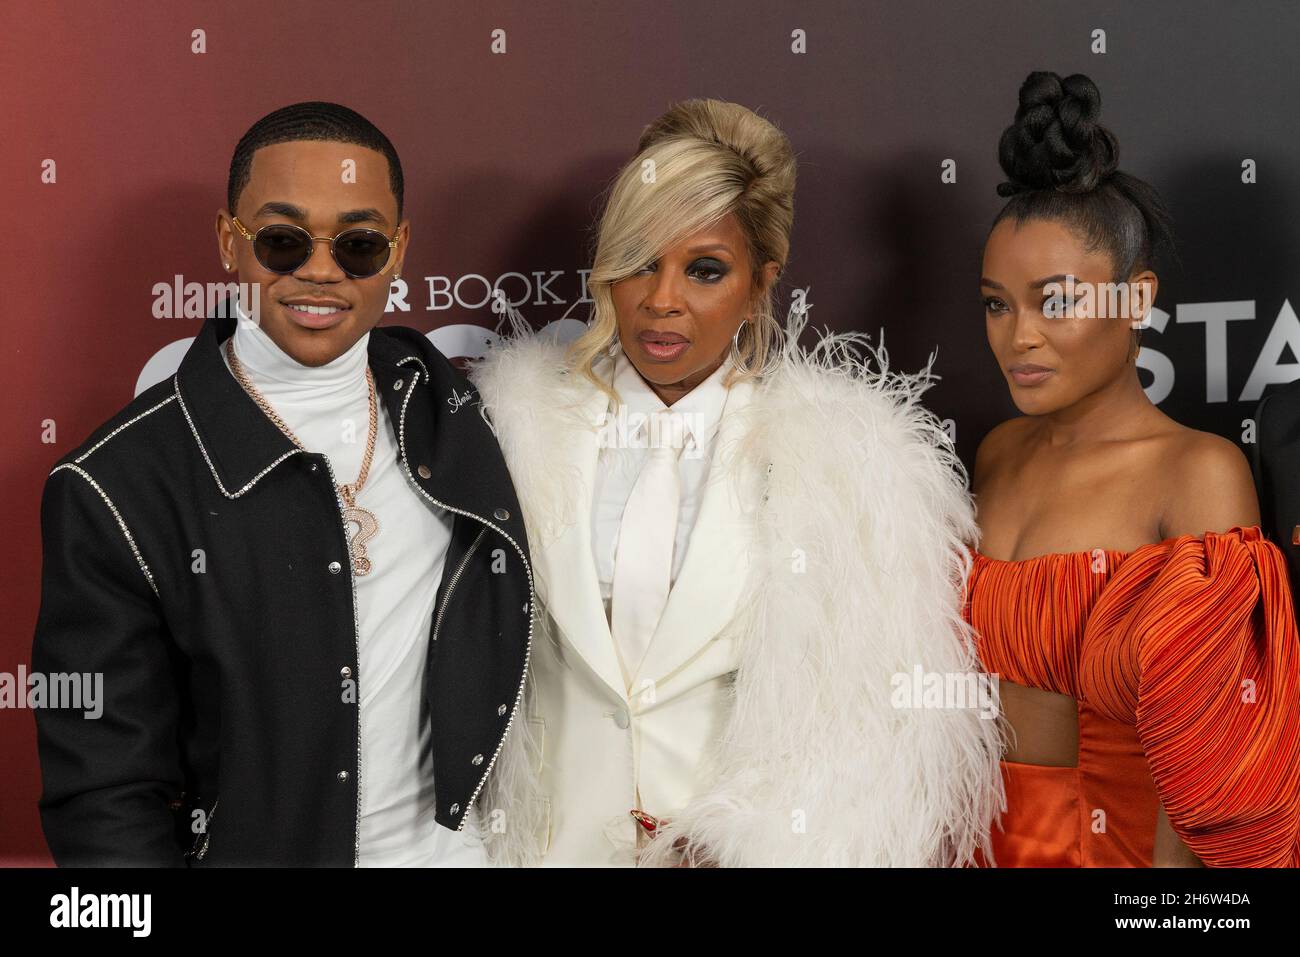 Michael Rainey Jr. and Mary J. Blige wearing dress by Dolce & Gabbana  attend premiere of Power Book II: Ghost season two by STARZ at SVA Theater  in New York on November